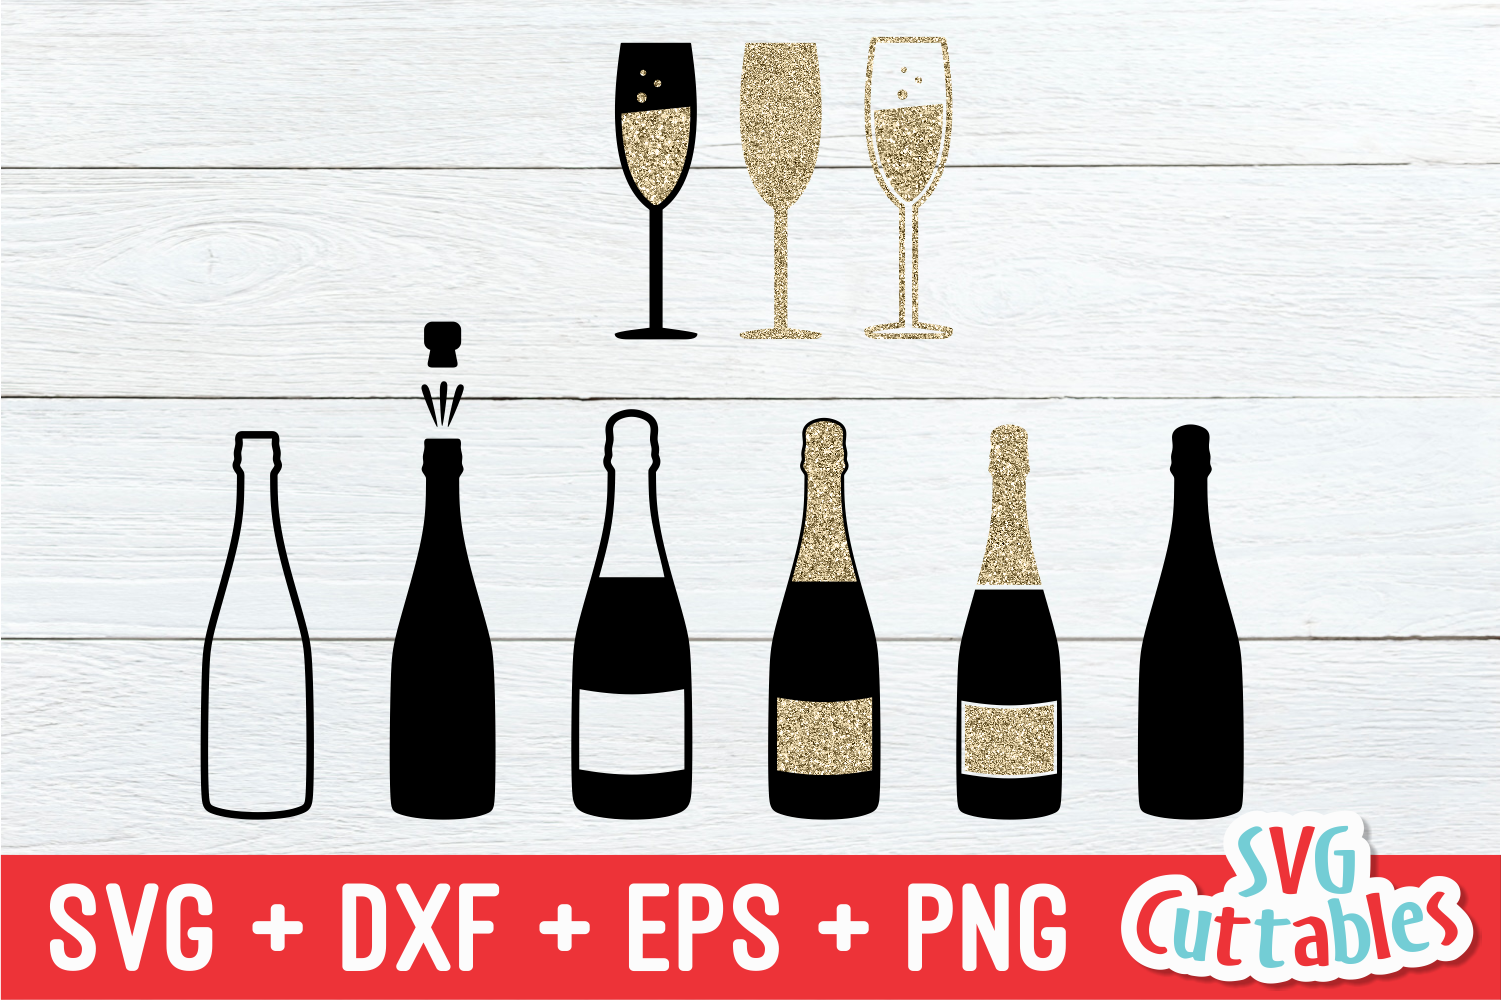 Champagne Bottles And Glasses Cut File By Svg Cuttables Thehungryjpeg Com